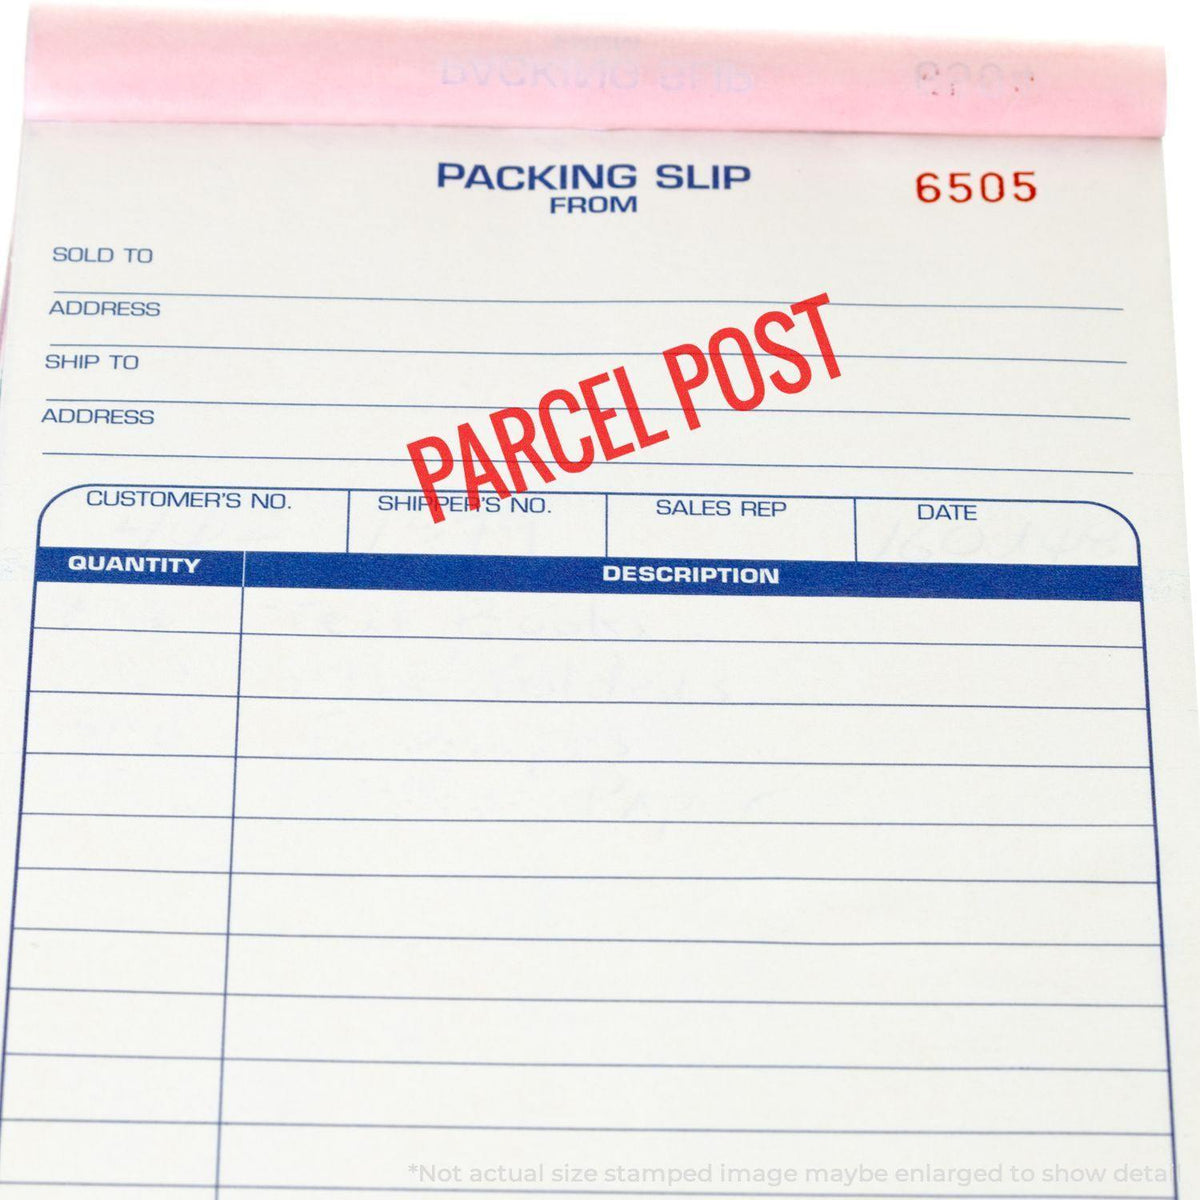 Parcel Post Rubber Stamp - Engineer Seal Stamps - Brand_Acorn, Impression Size_Small, Stamp Type_Regular Stamp, Type of Use_Postal &amp; Mailing, Type of Use_Shipping &amp; Receiving